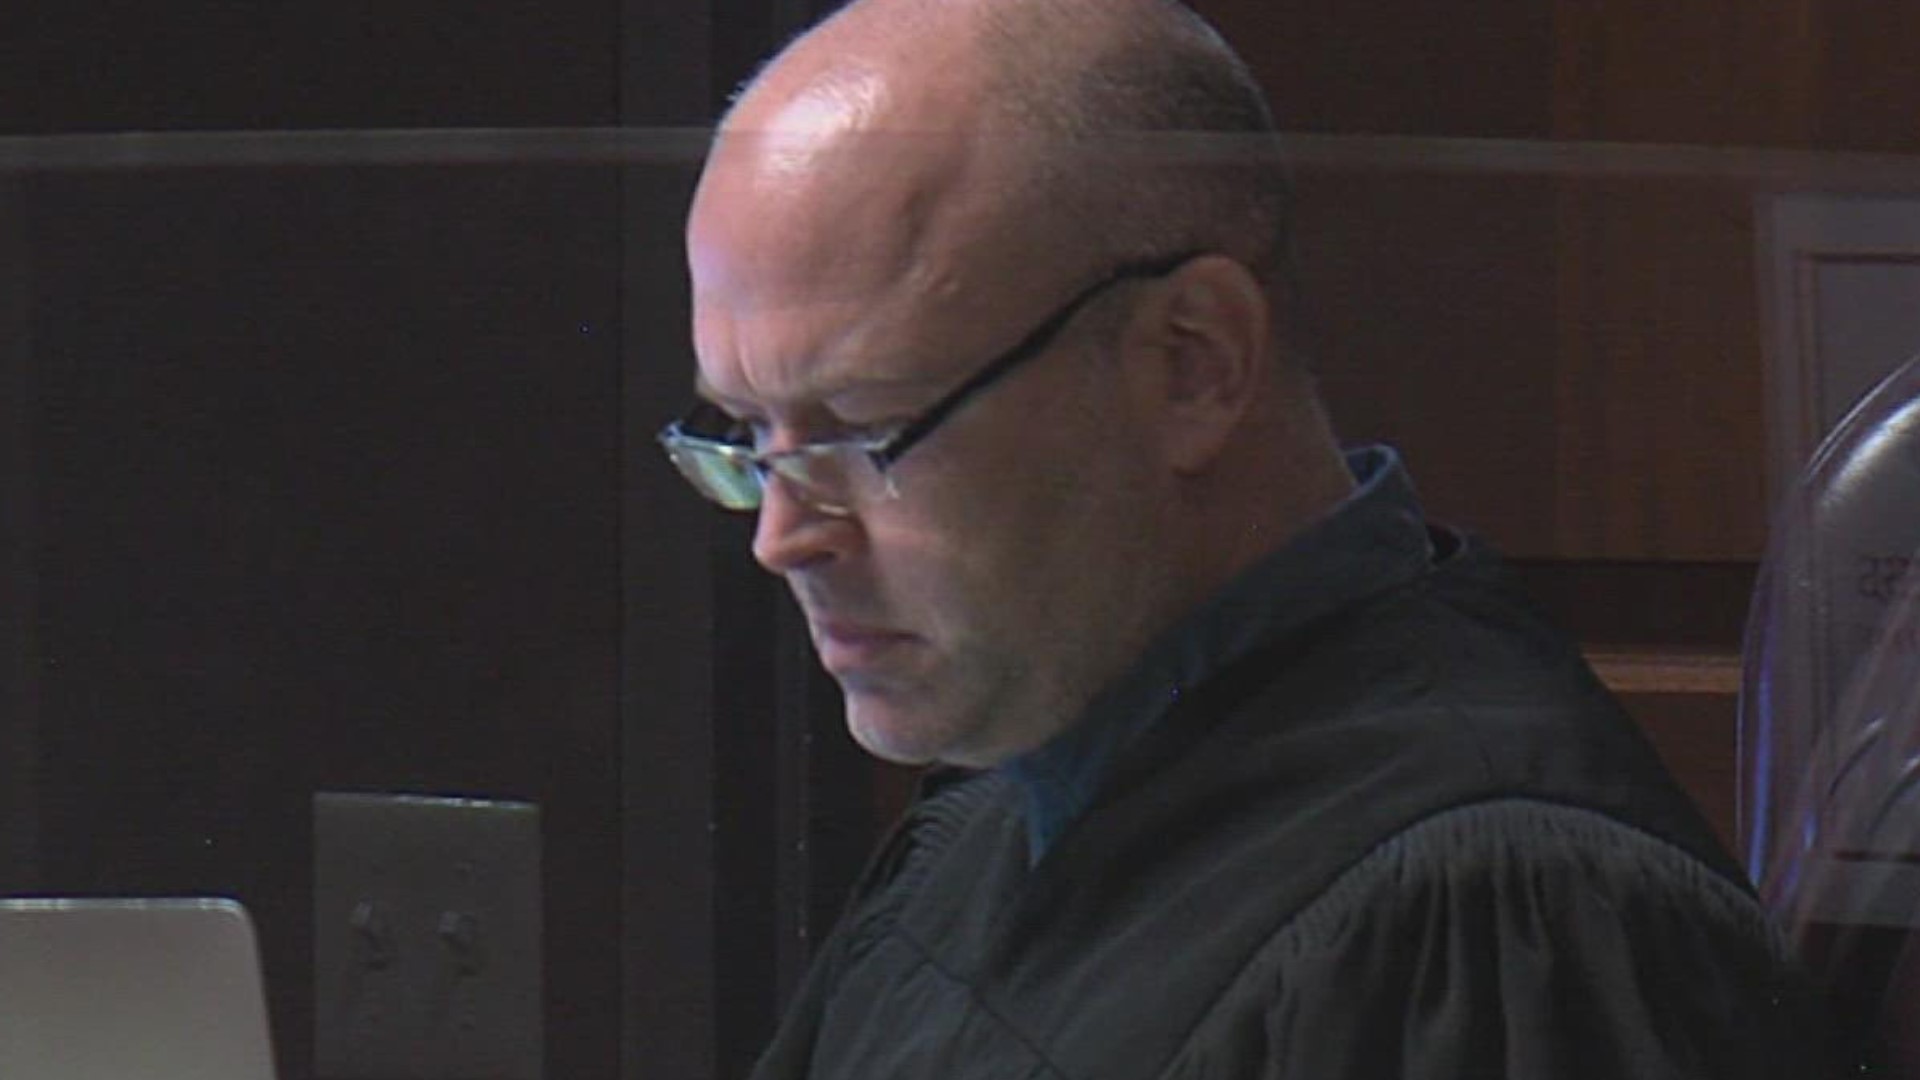 "I'm going to do everything I can to stop this," Judge Timothy McCoy told 3NEWS.